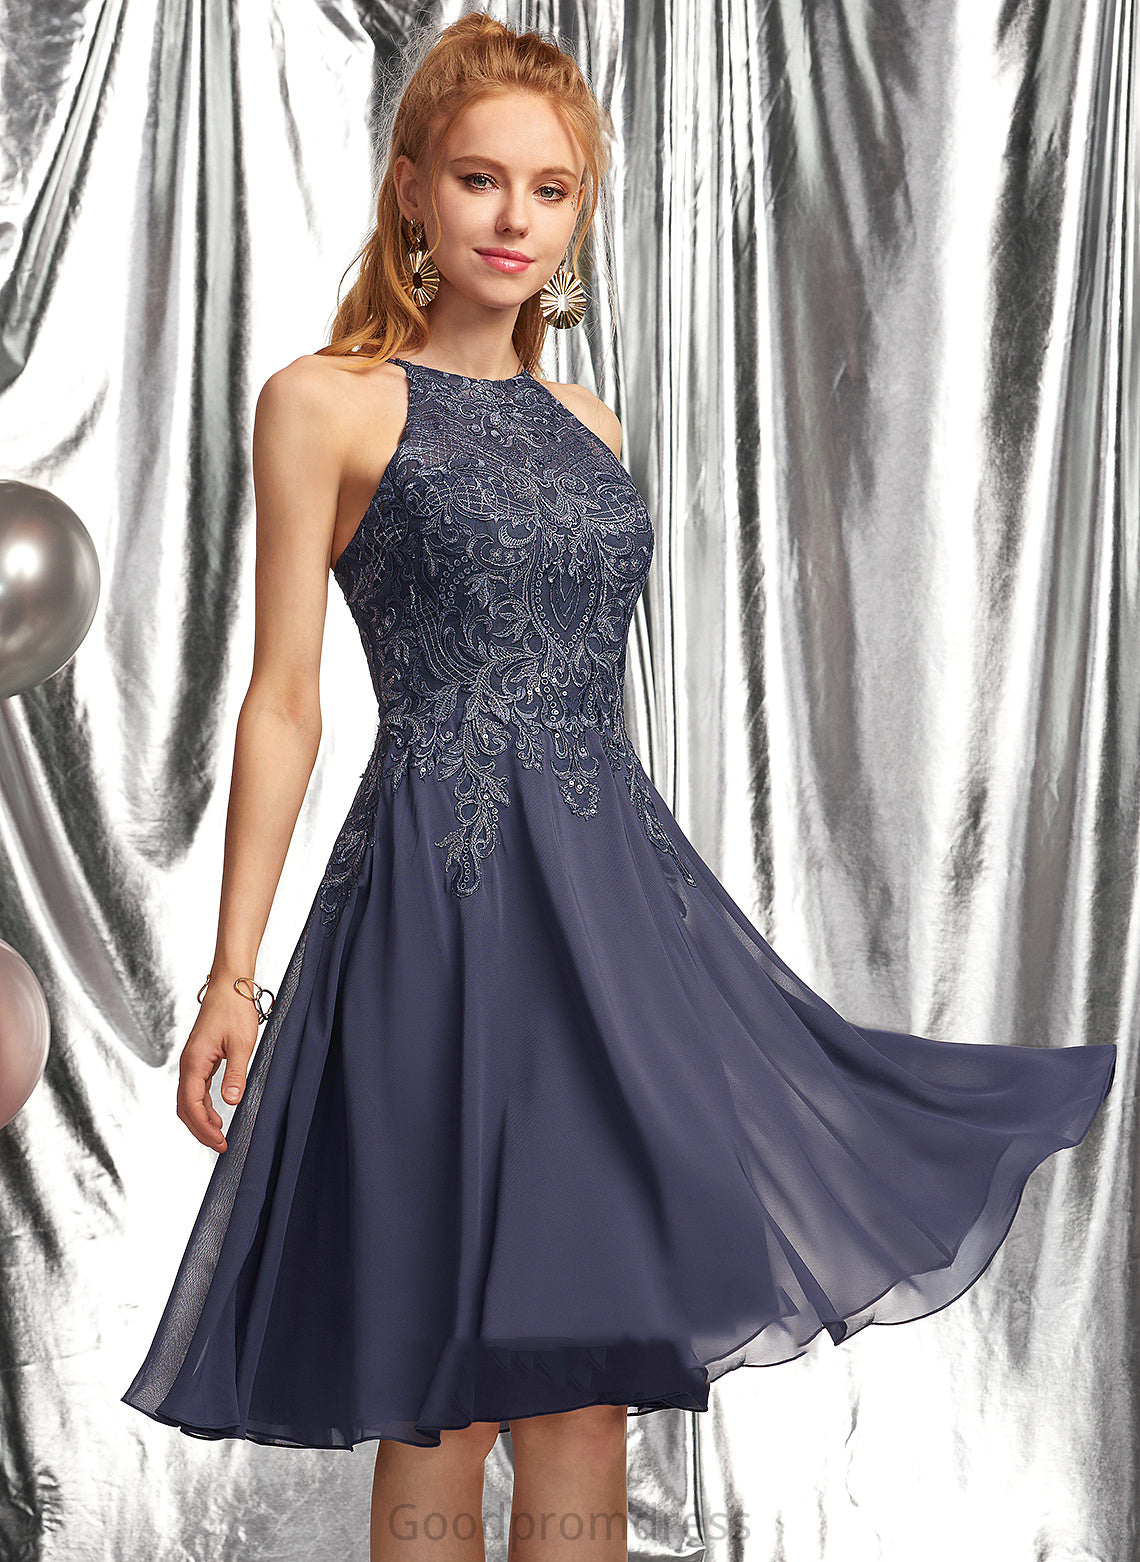 Dress Lace Lace Knee-Length Scoop Itzel Neck With Homecoming A-Line Homecoming Dresses Chiffon Appliques